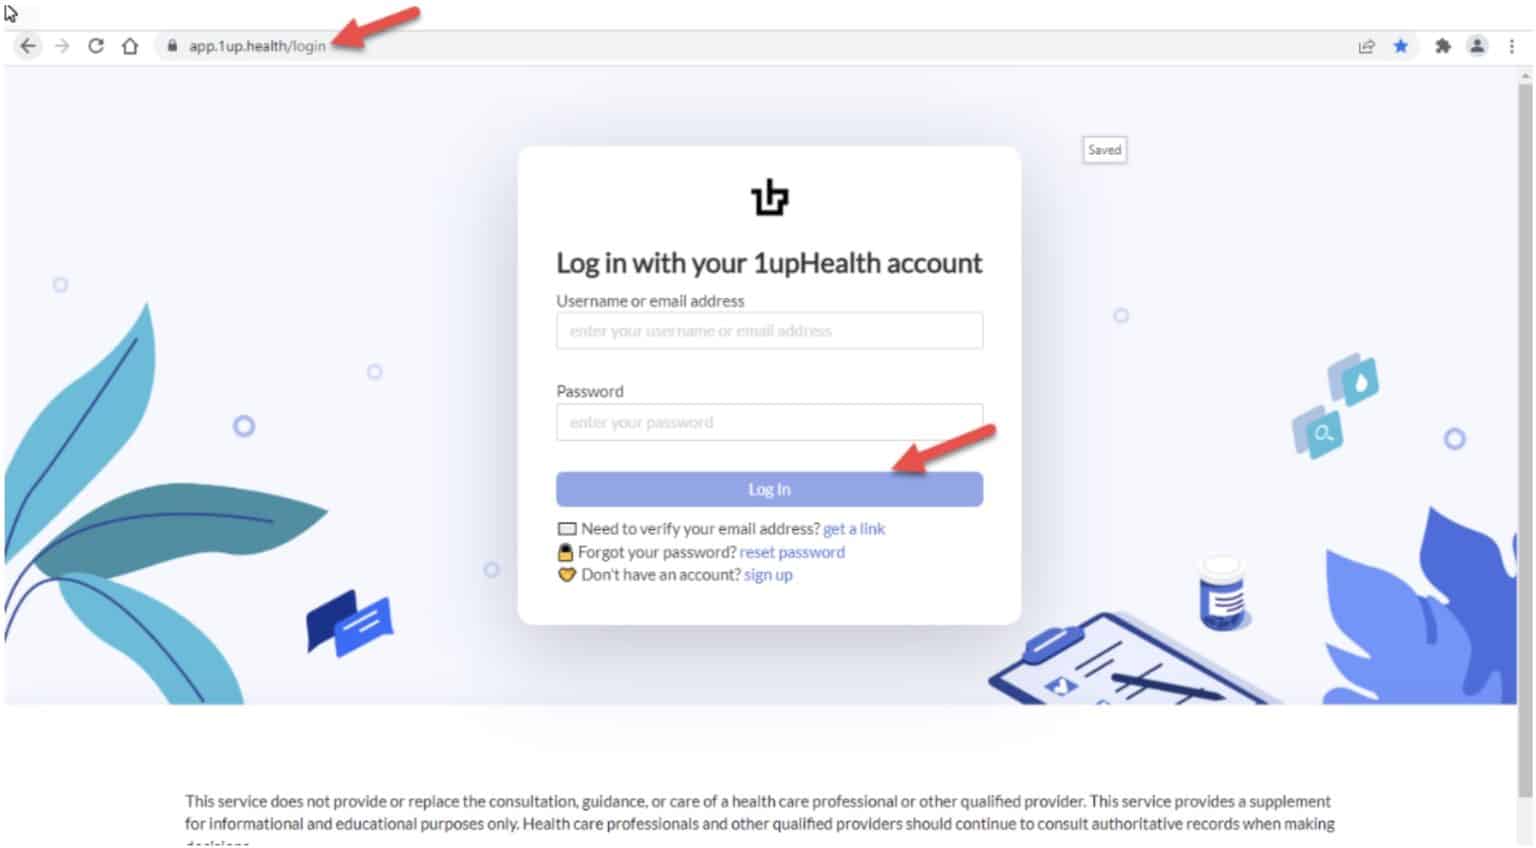 Log in page on 1upHealth.com site with fields for username or email address and password, and a login button